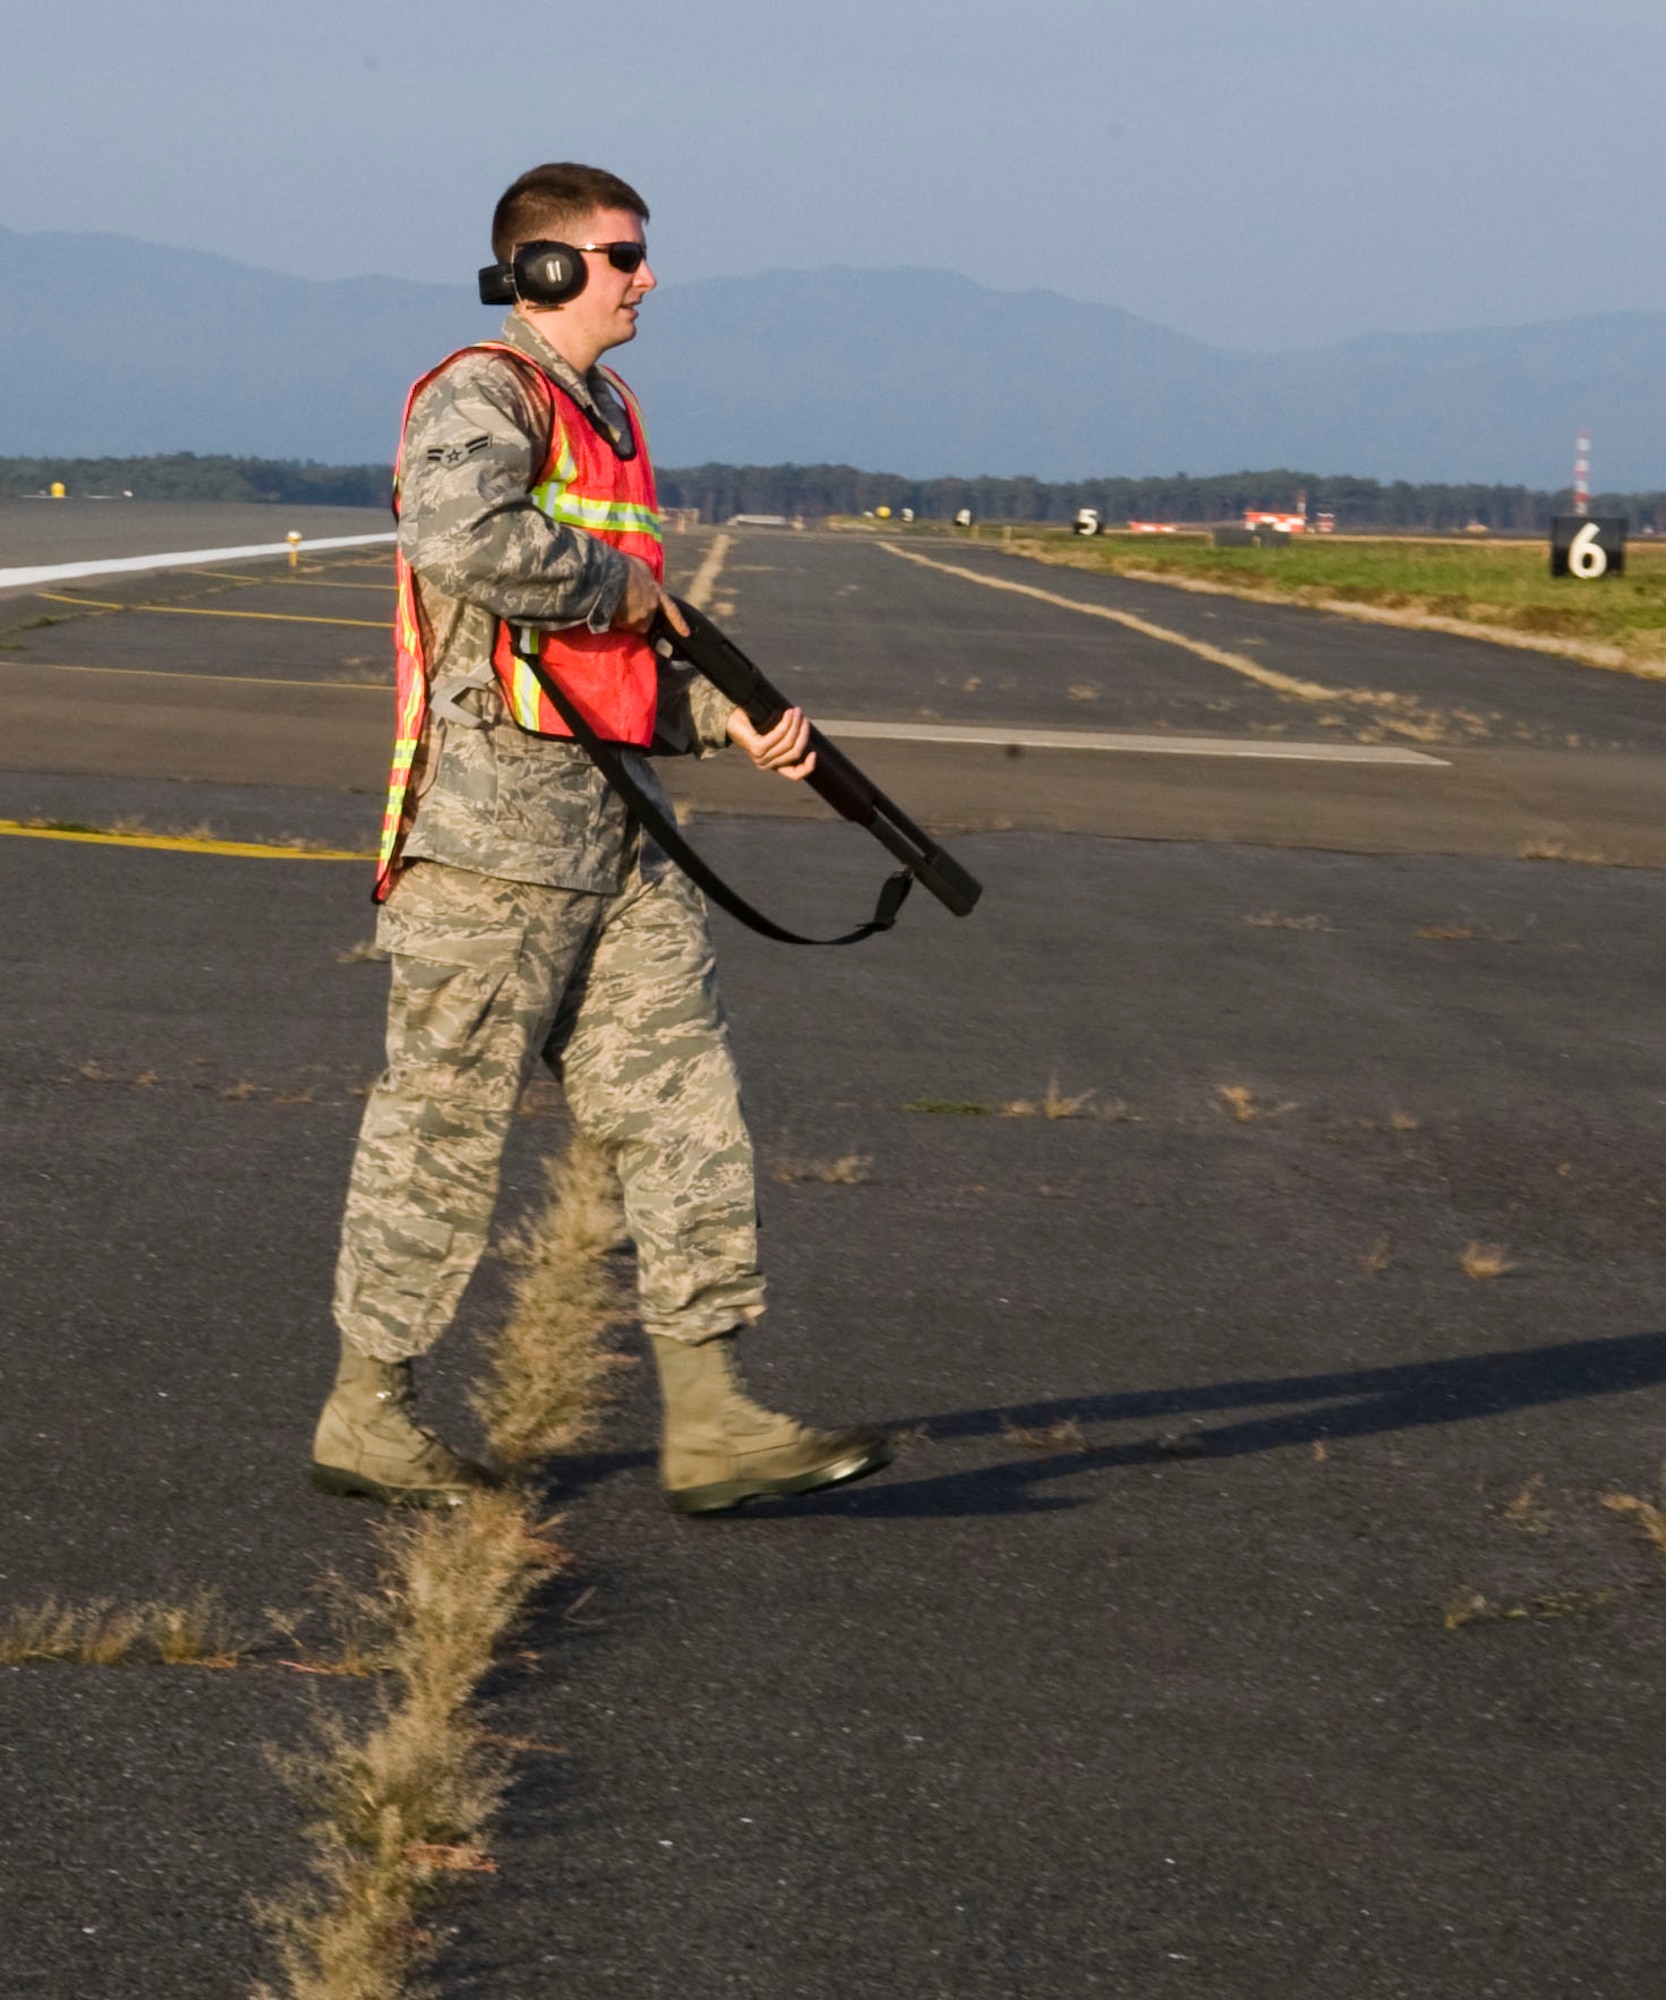 U.S. Air Force Airman 1st Class Jarrett Dowey, 35th Operations Support Squadron airfield management operations coordinator, walks across the flightline taxi-way in preparation to scare birds at Misawa Air Base, Japan, Oct. 30, 2012. Airfield management drives around the flightline three times a day to perform bird aircraft strike hazard prevention. (U.S. Air Force photo by Airman 1st Class Kenna Jackson)